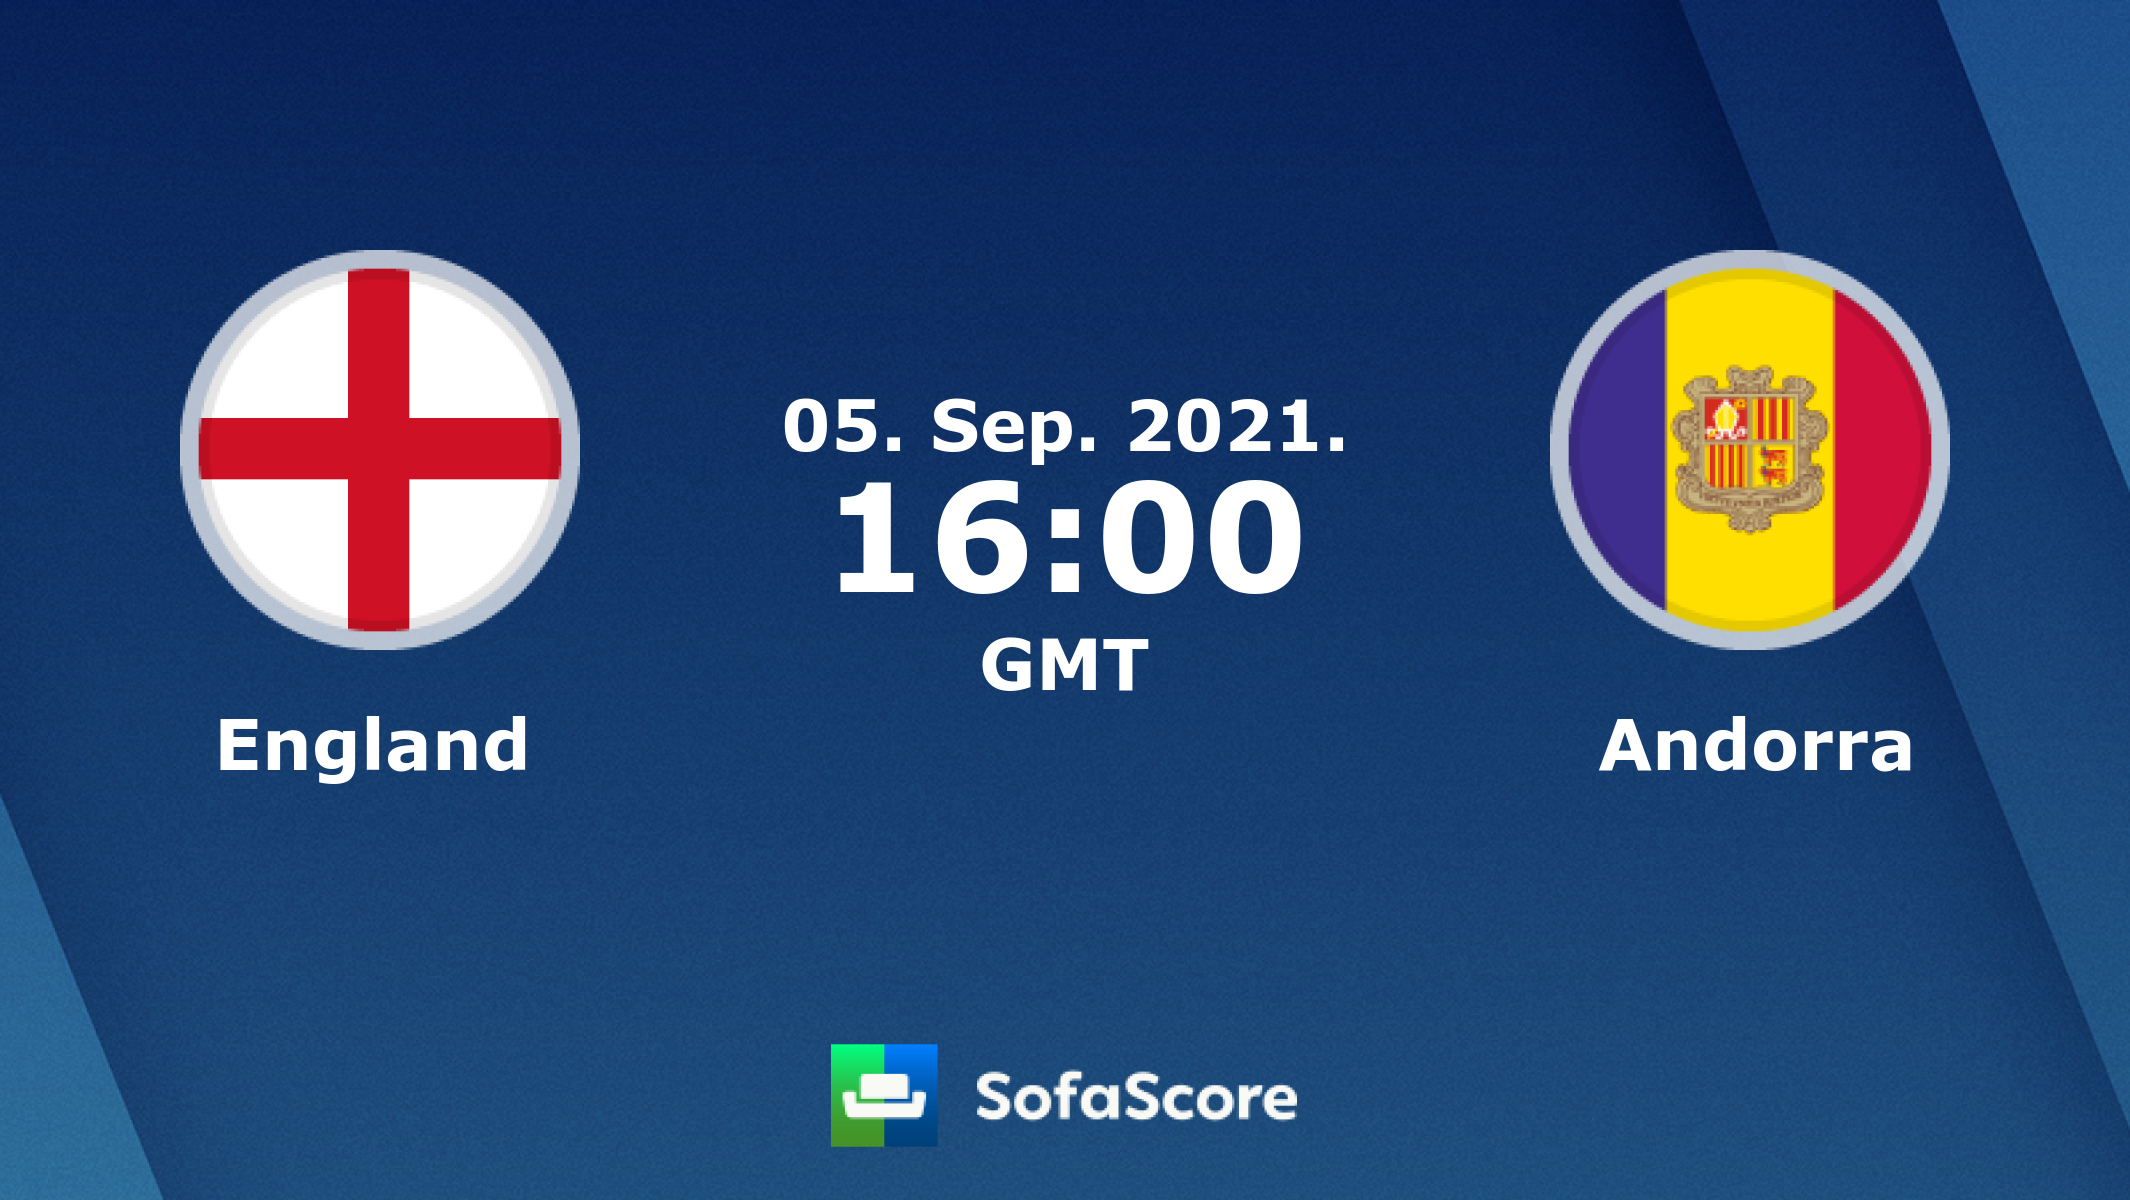 England Vs Andorra Kick-off Time Where to Watch? TV and Live Stream Information!